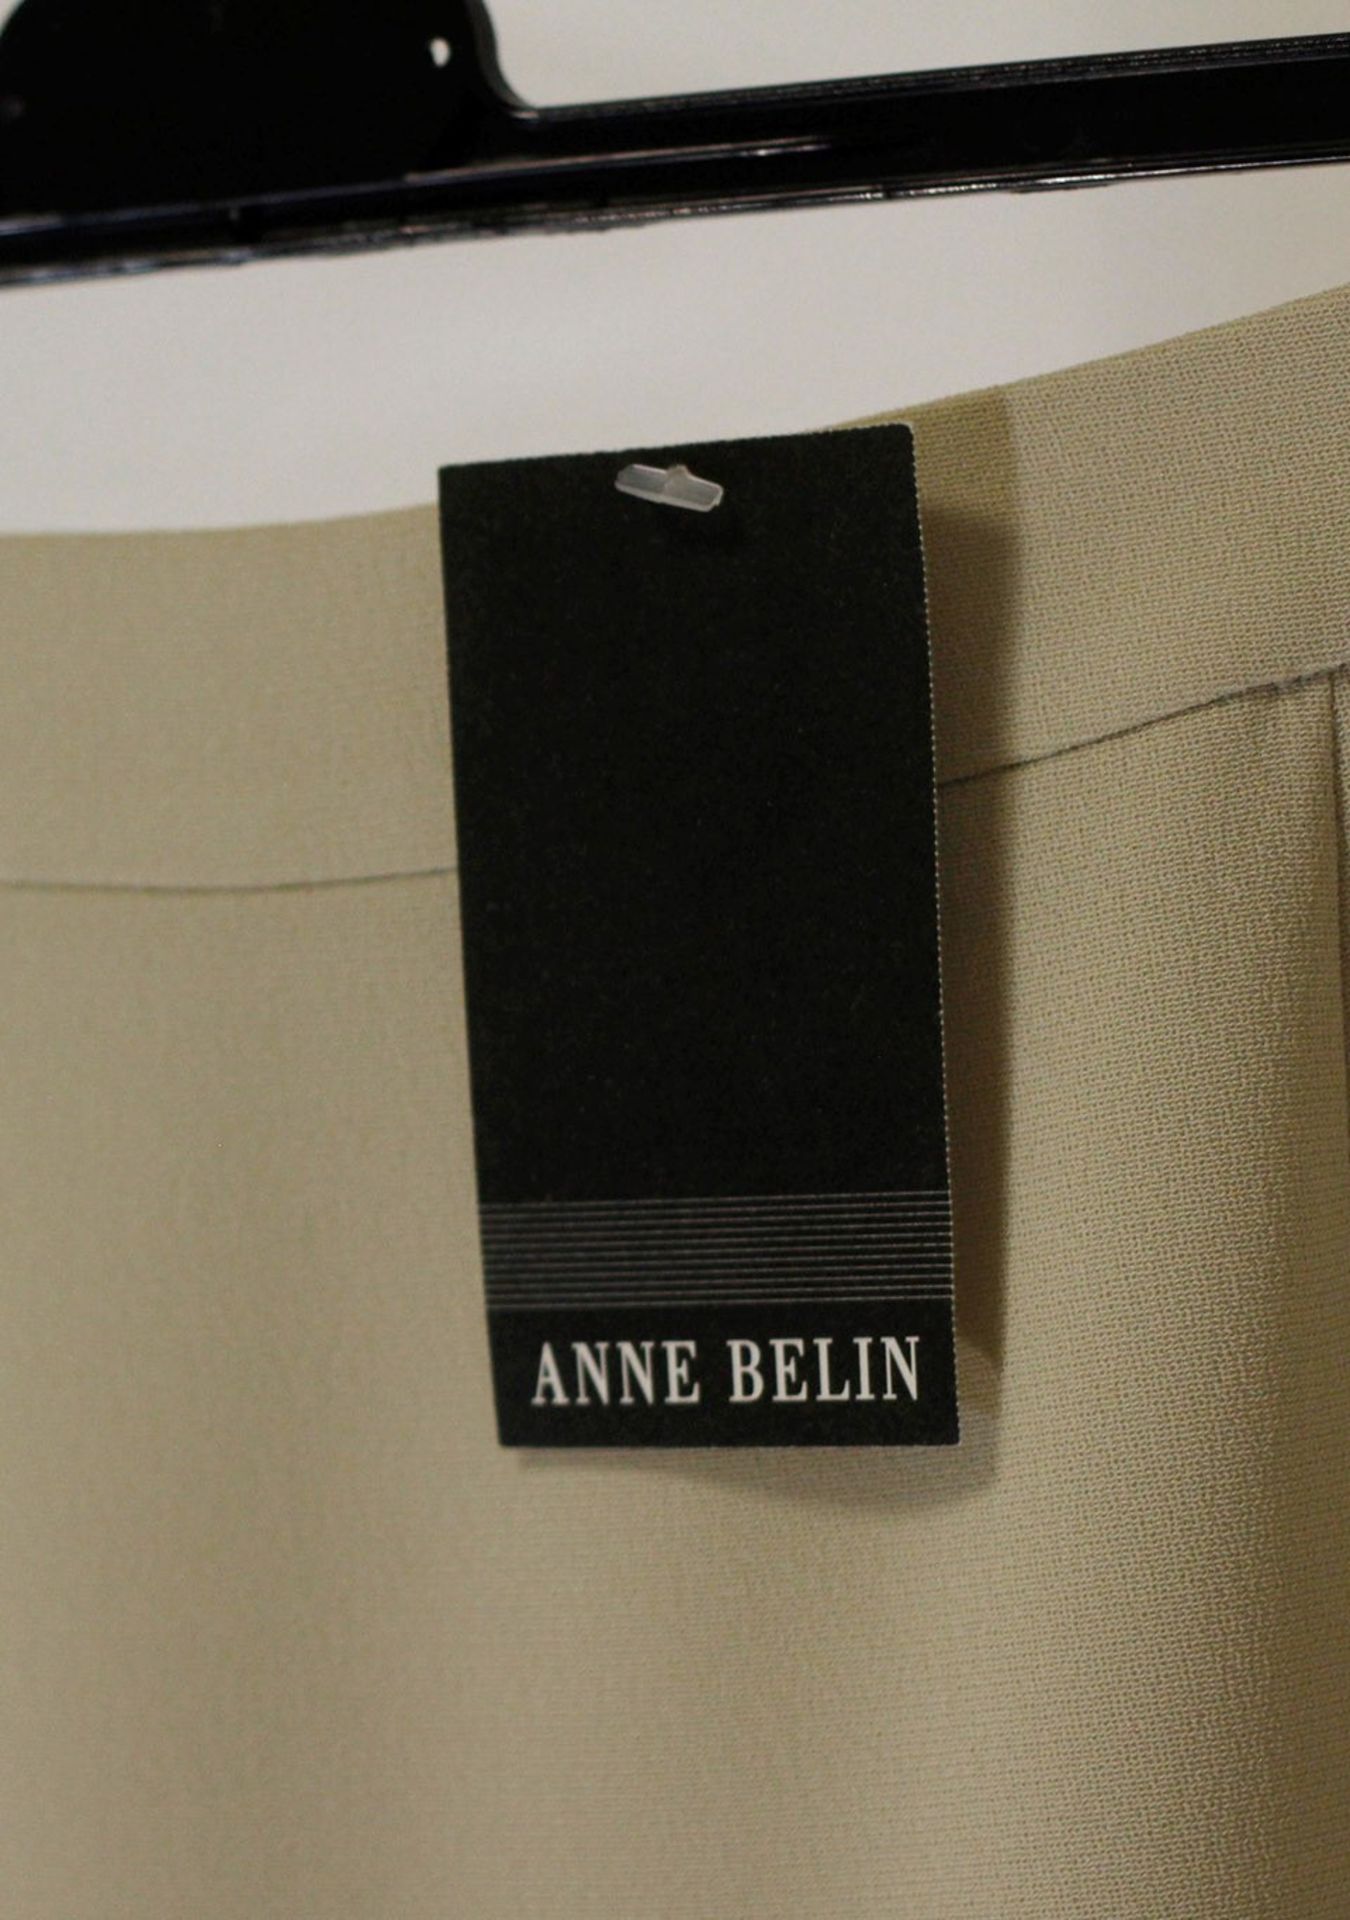 1 x Anne Belin Pistachio Skirt - Size: 20 - Material: 100% Polyester - From a High End Clothing - Image 11 of 12